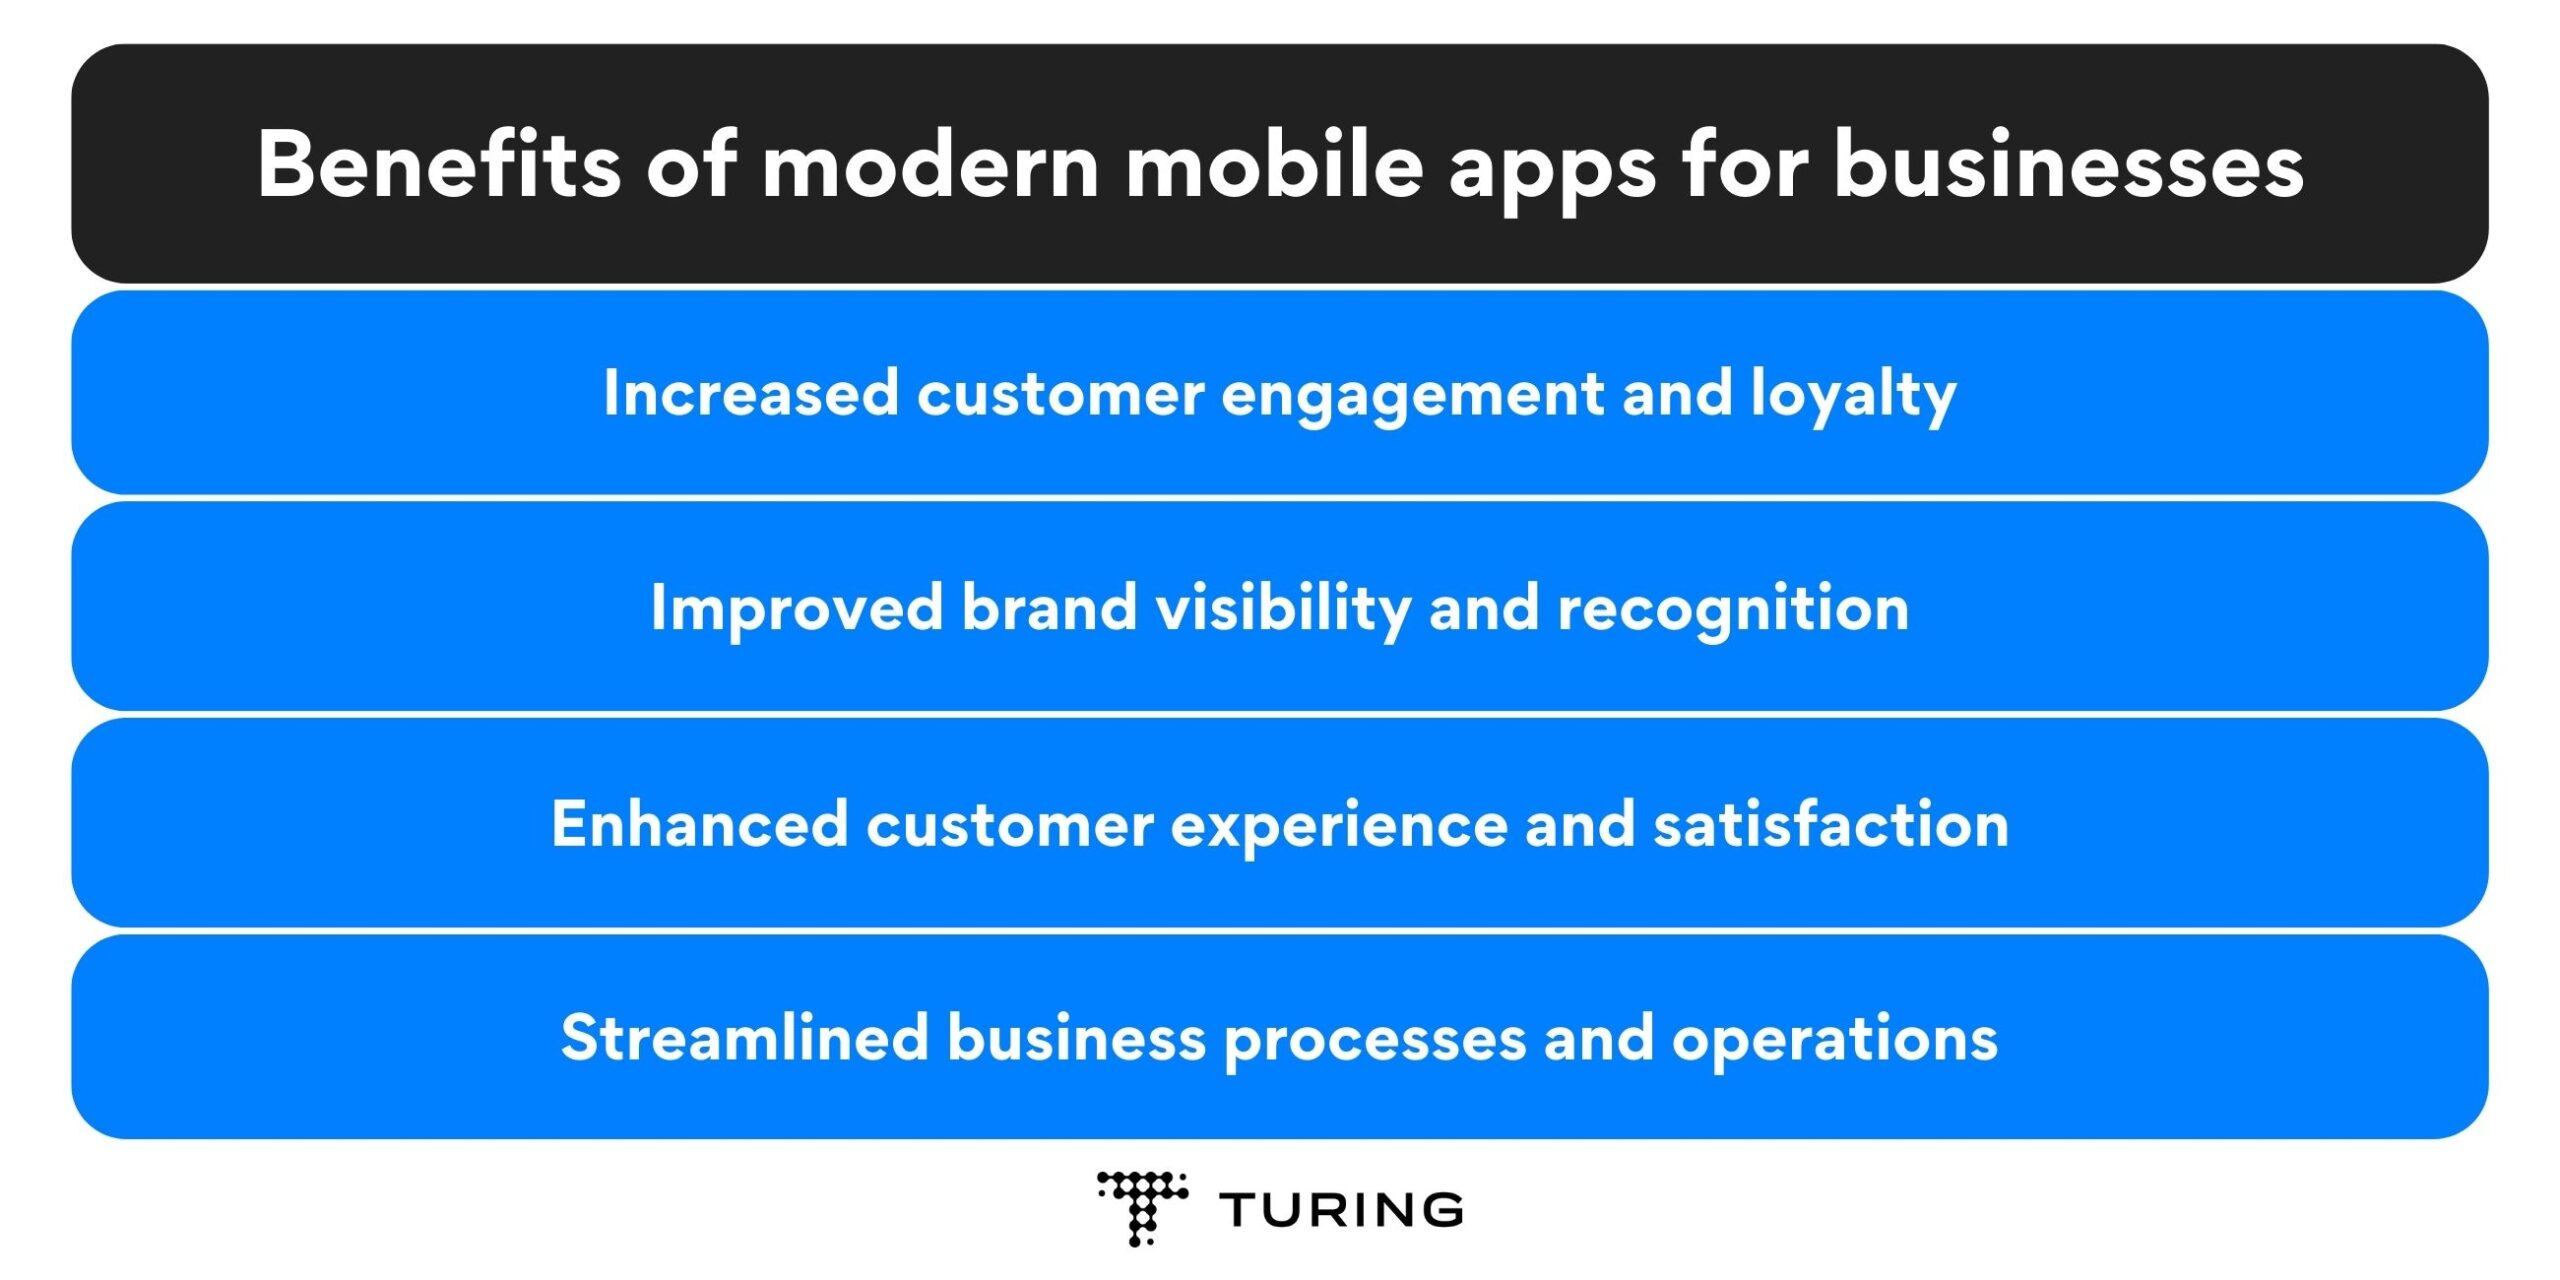 Benefits of modern mobile apps for businesses